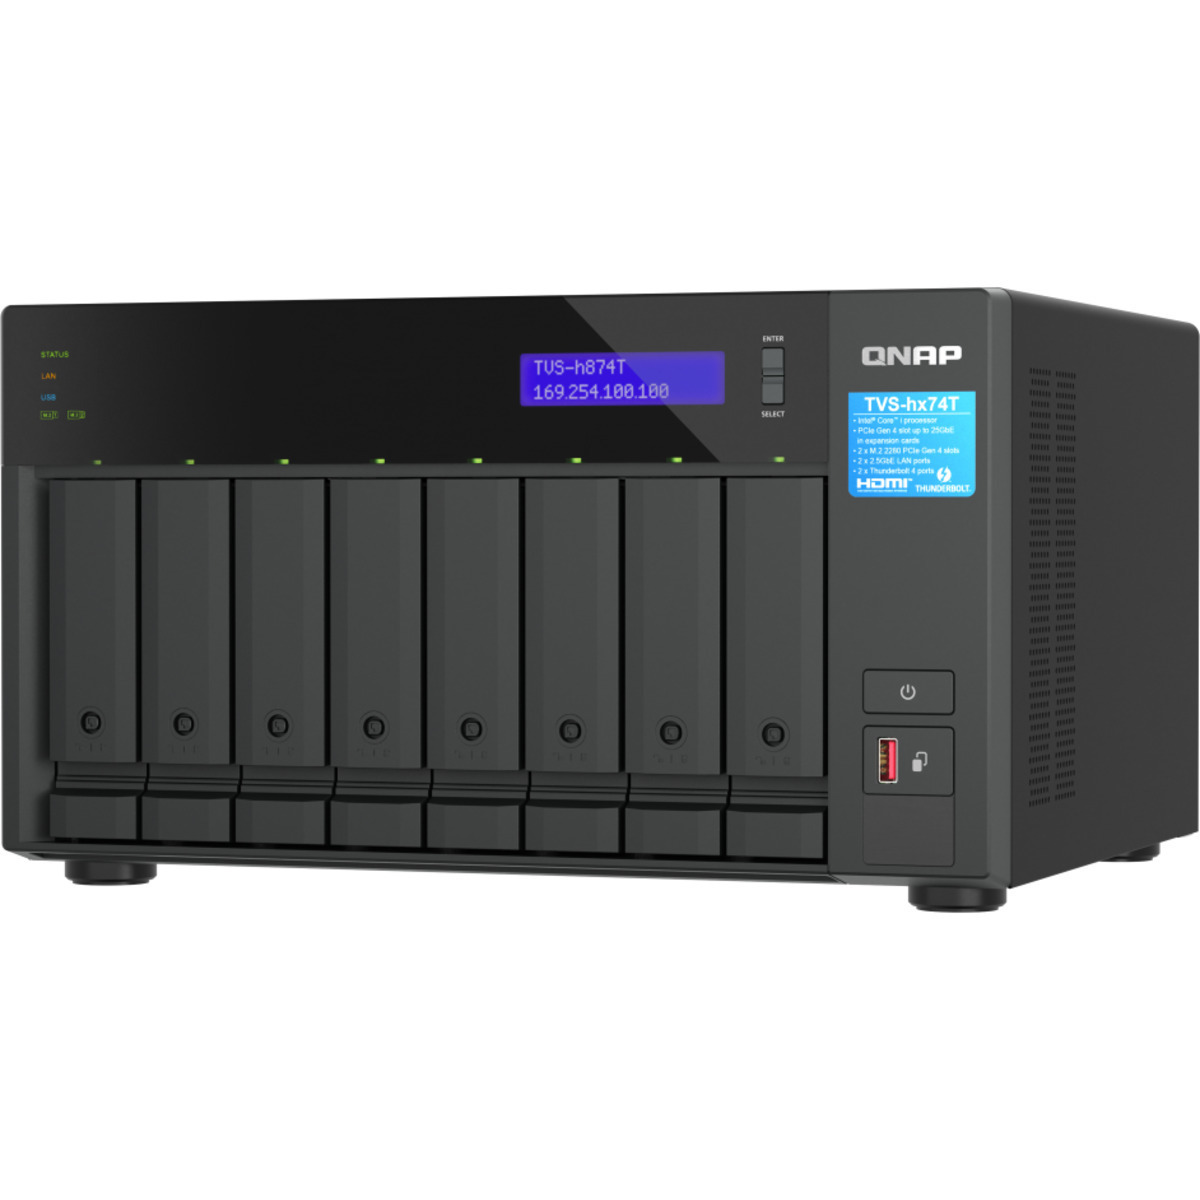 QNAP TVS-h874T Core i7 Thunderbolt 4 8tb 8-Bay Desktop Multimedia / Power User / Business DAS-NAS - Combo Direct + Network Storage Device 4x2tb Western Digital Red SA500 WDS200T1R0A 2.5 560/530MB/s SATA 6Gb/s SSD NAS Class Drives Installed - Burn-In Tested TVS-h874T Core i7 Thunderbolt 4